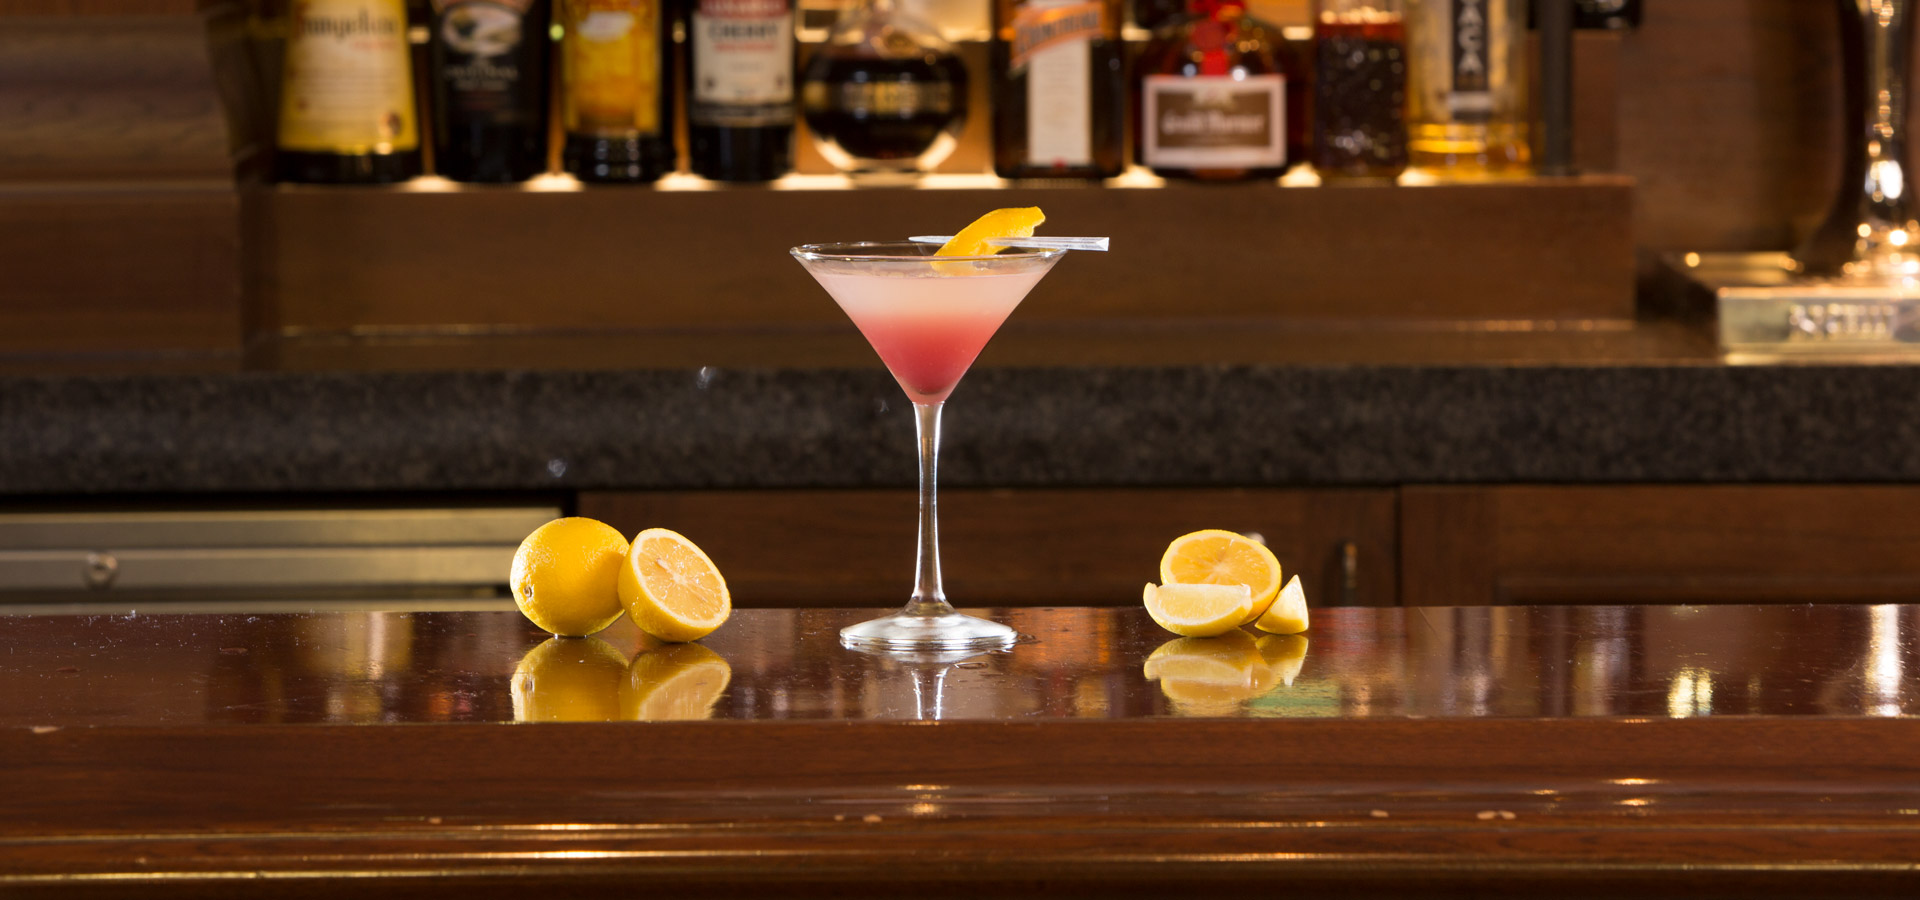 Pink liquor in a cocktail glass with a slice of lemon placed on a table